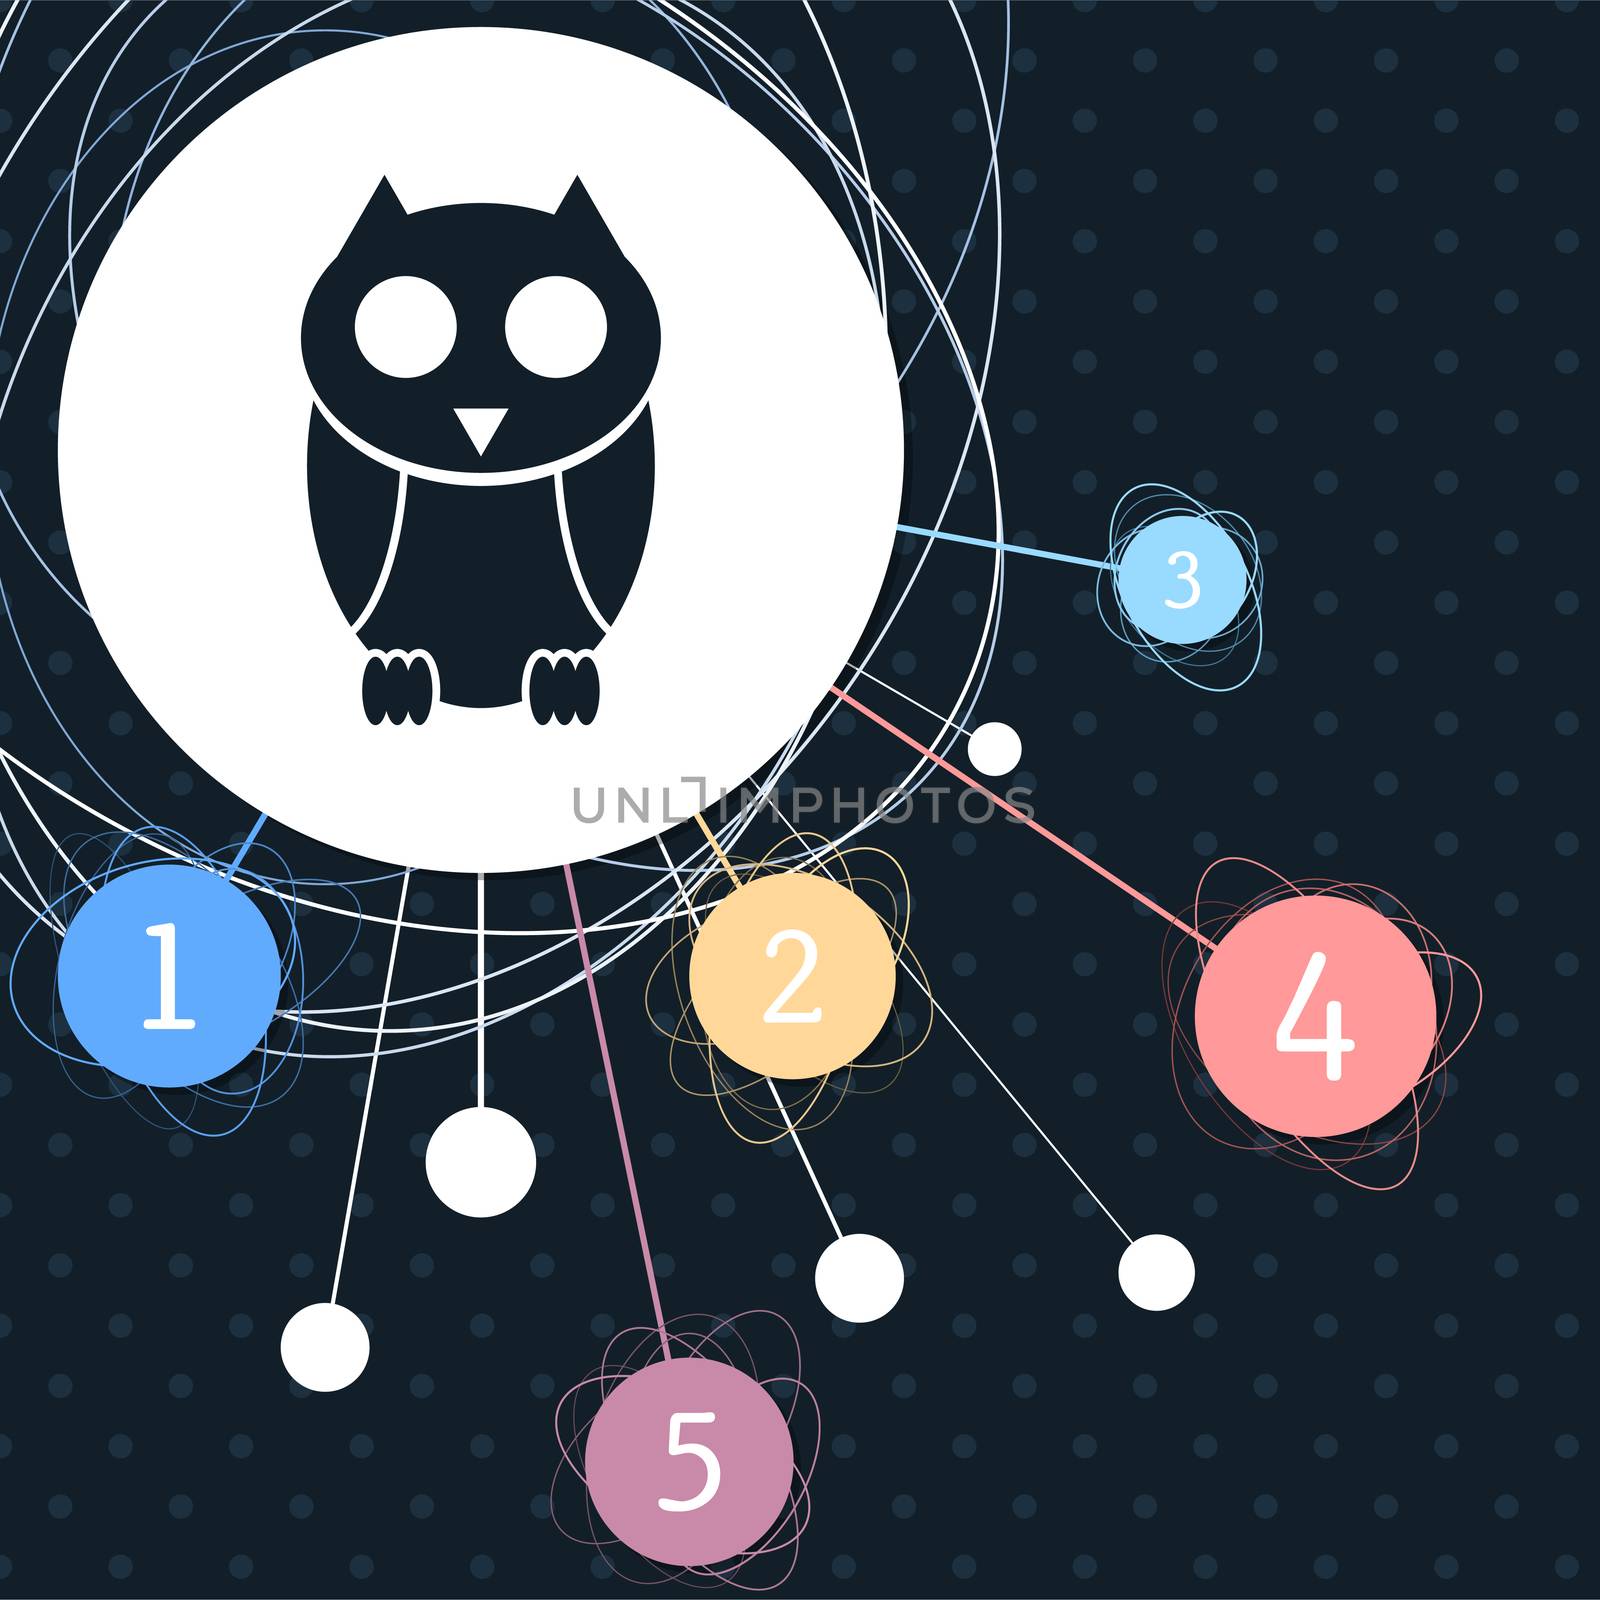 Cute owl cartoon character icon with the background to the point and with infographic style. illustration